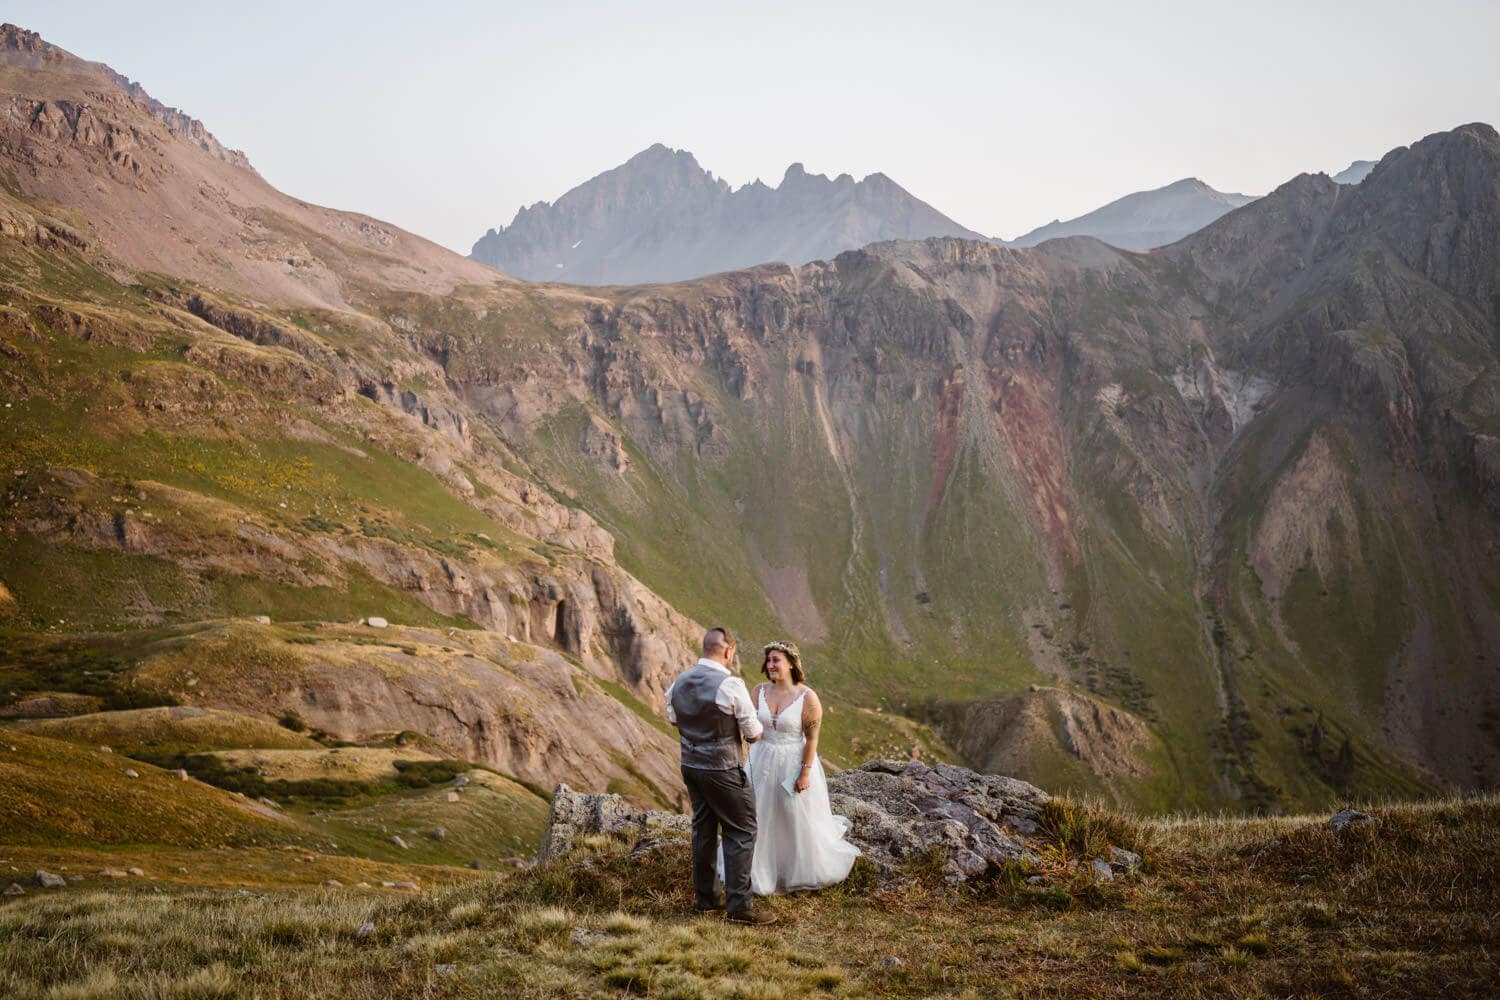 A self solemnization vow ceremony in the San Juan Mountains,.